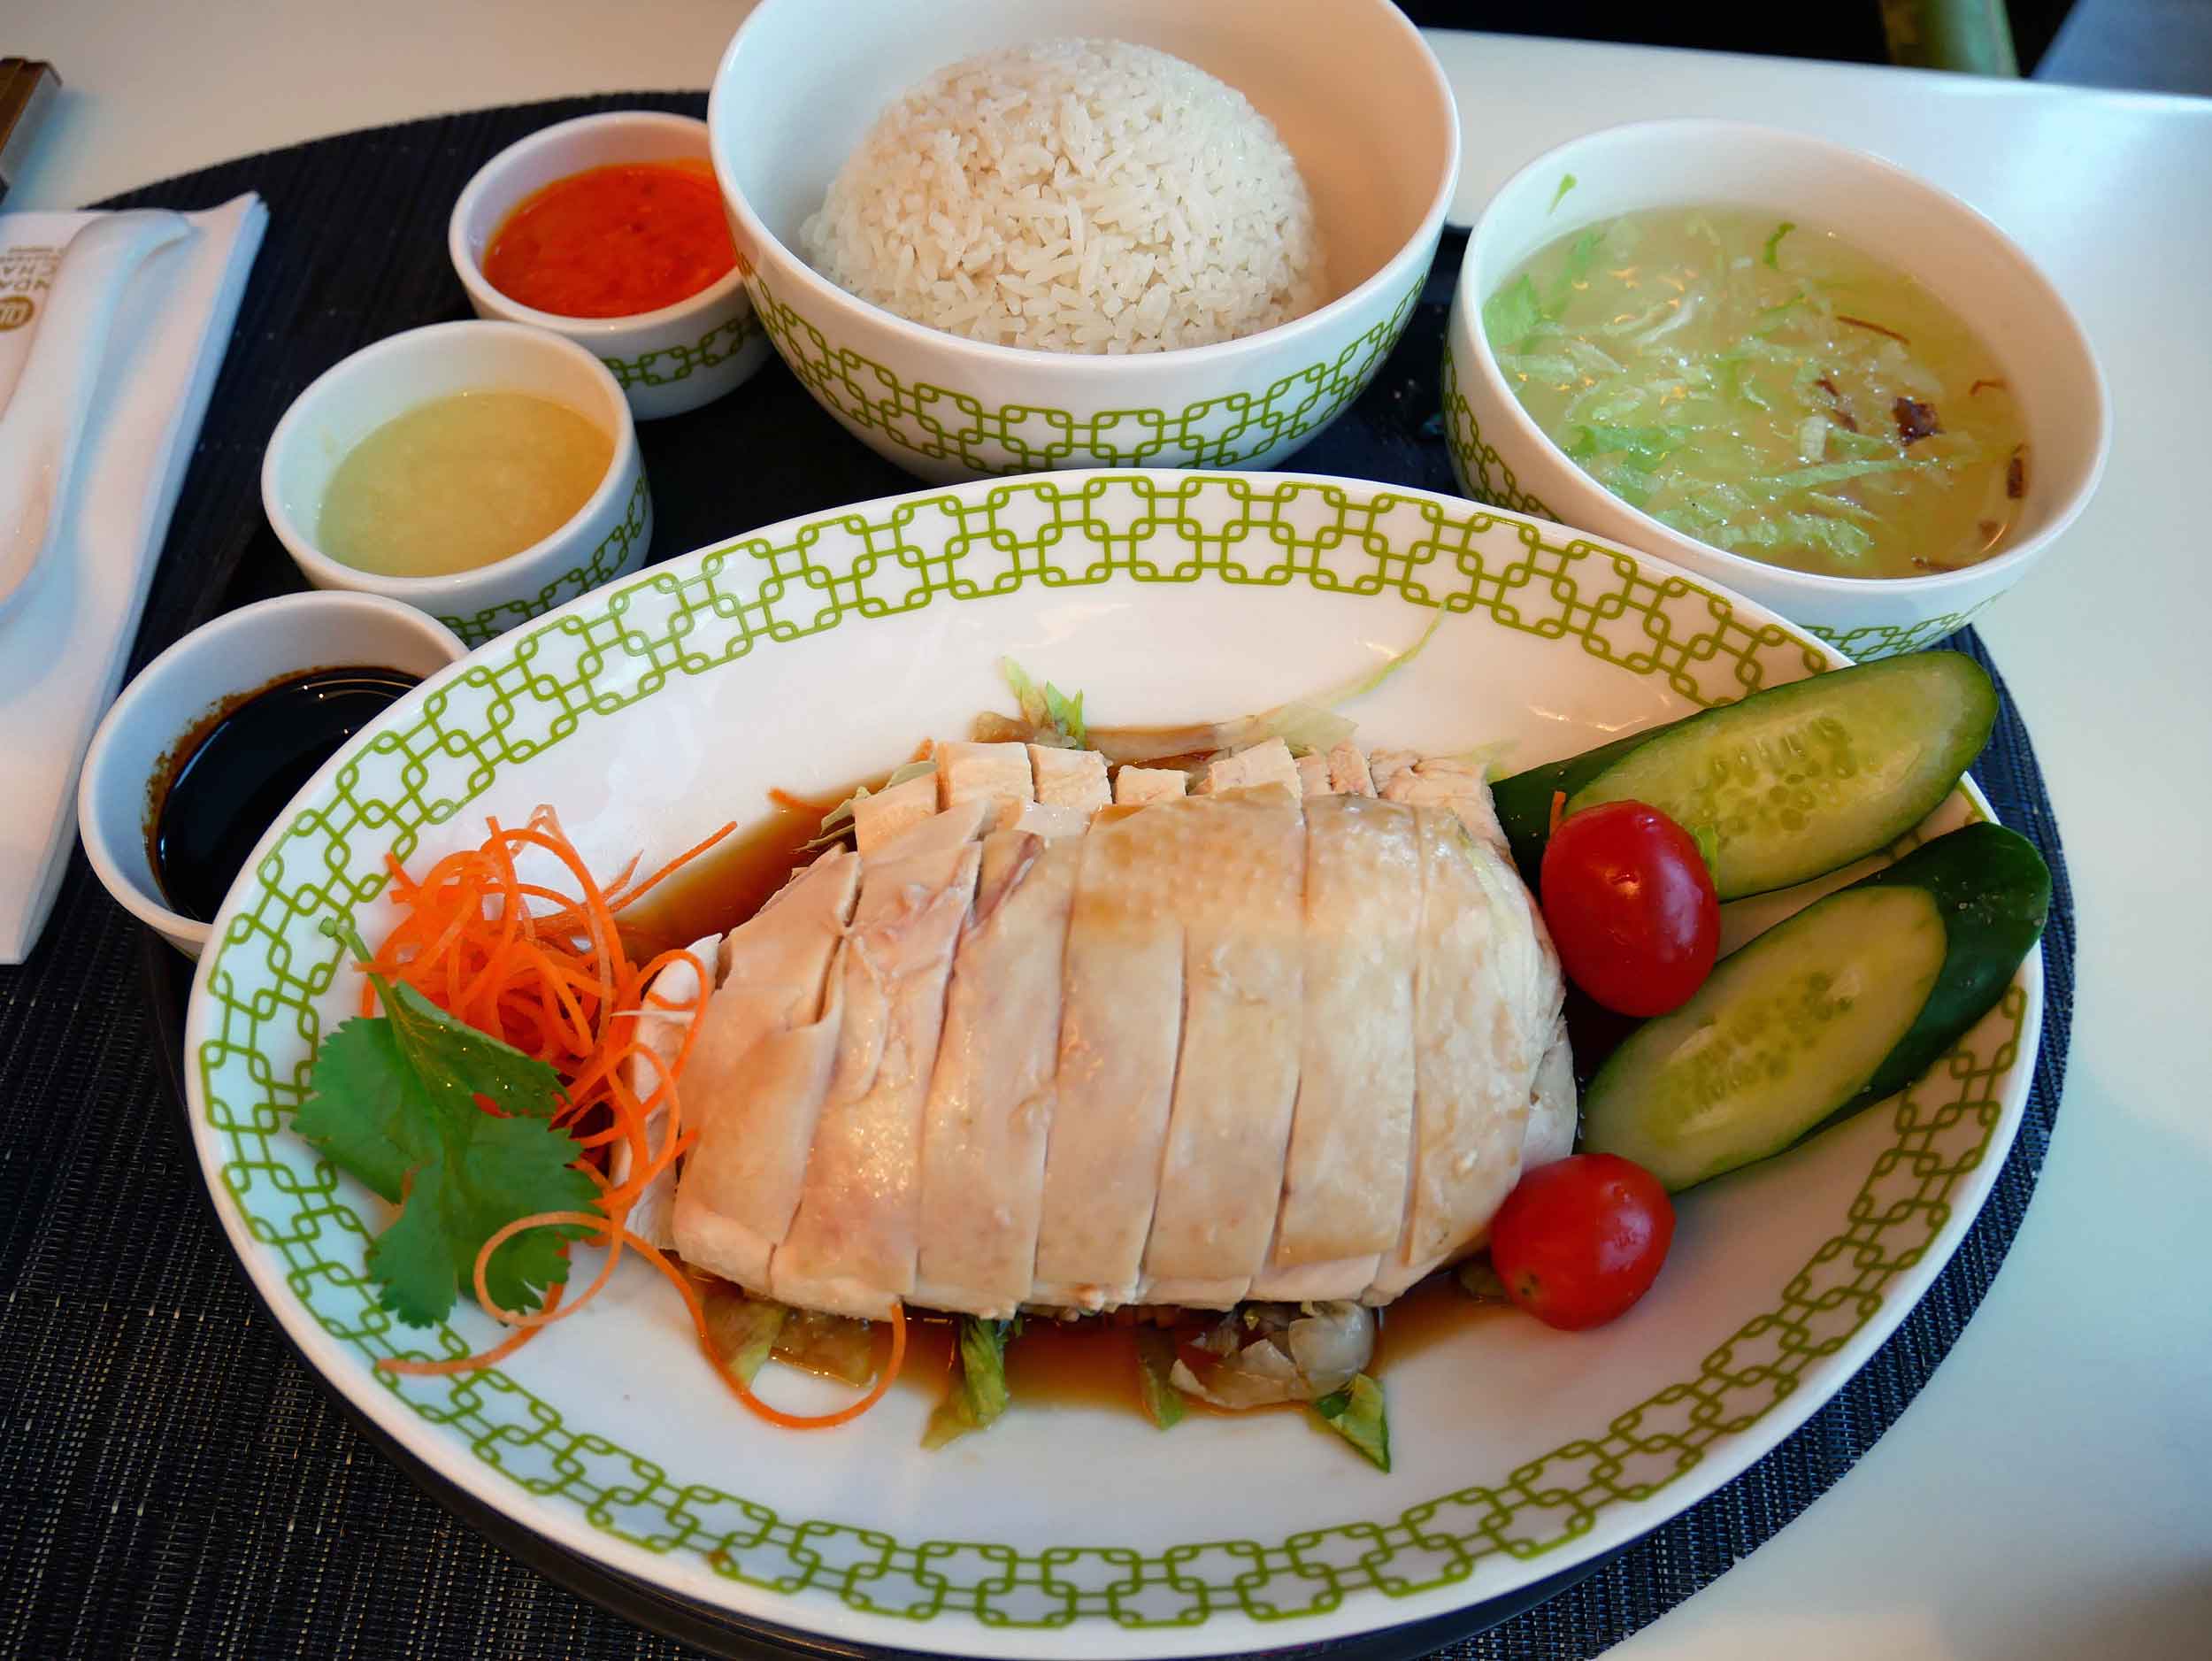  The famous Hainan Chicken Rice at Chatterbox was our first taste of Singapore. 